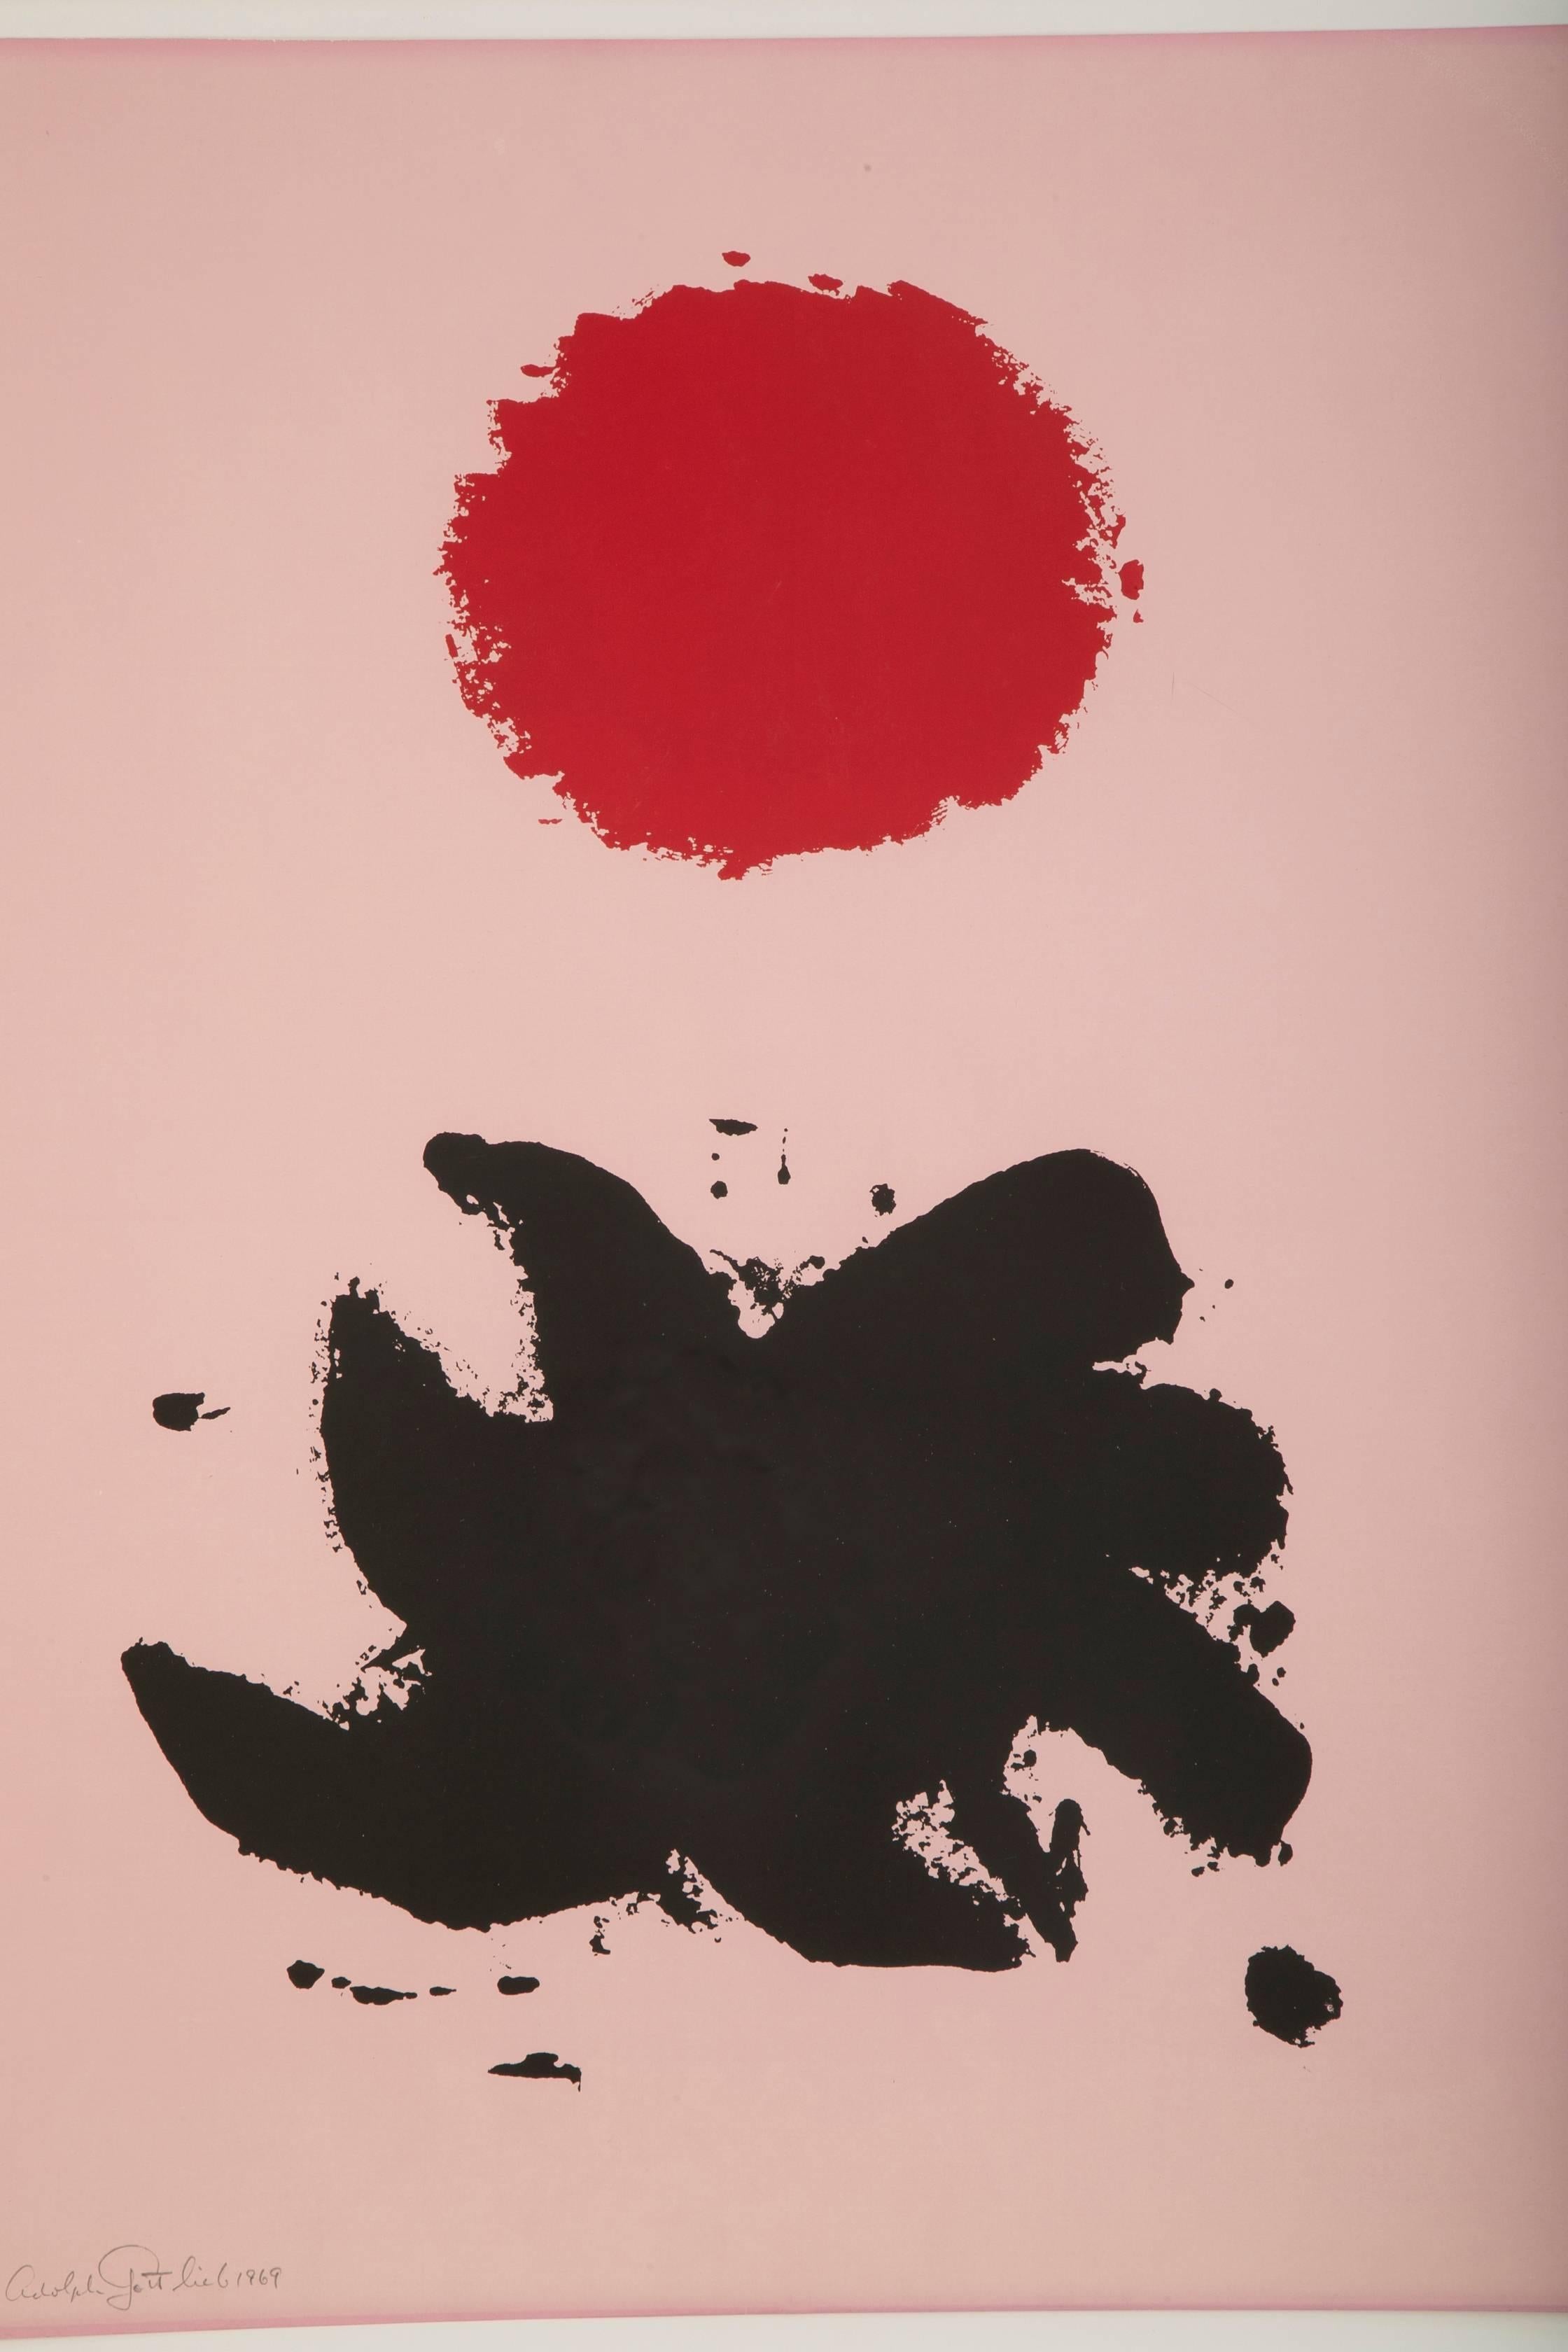 A color silkscreen by Adolph Gottlieb, signed, dated 1969 and numbered 57/95 in pencil. Published by Marlborough Graphics, Inc., New York.